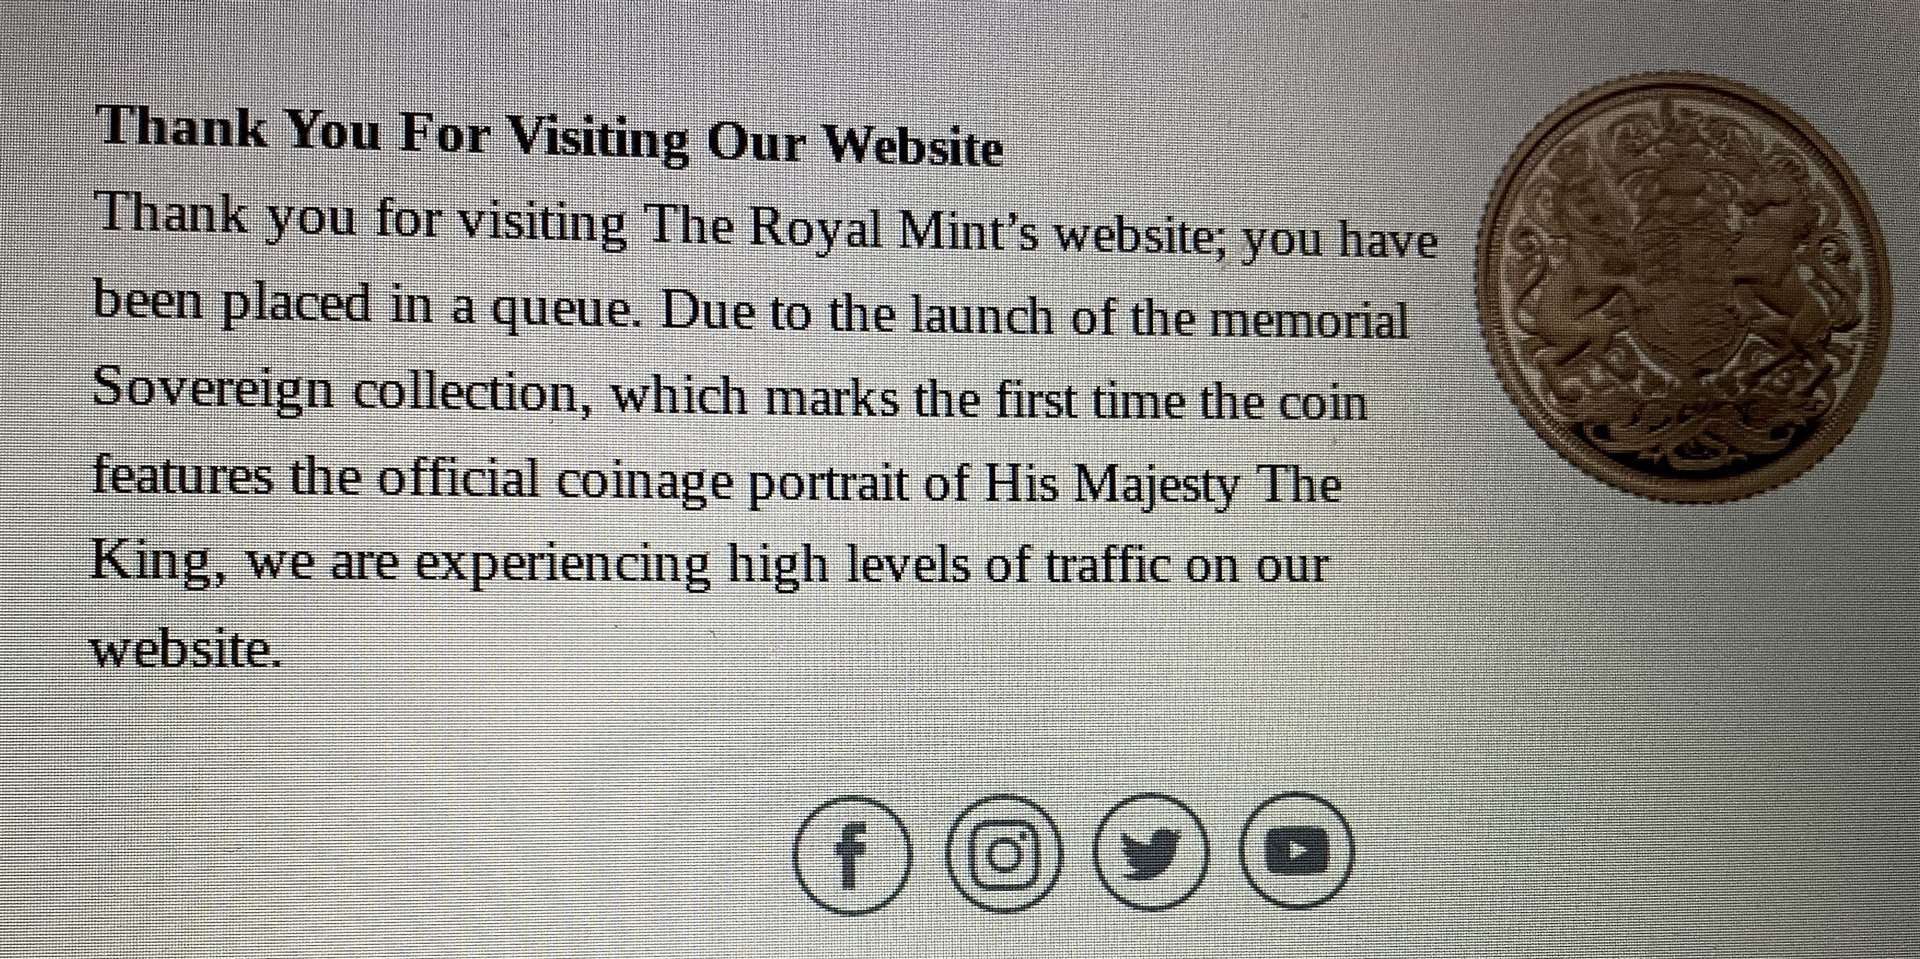 Visitors to the Royal Mint website are being met with virtual queues